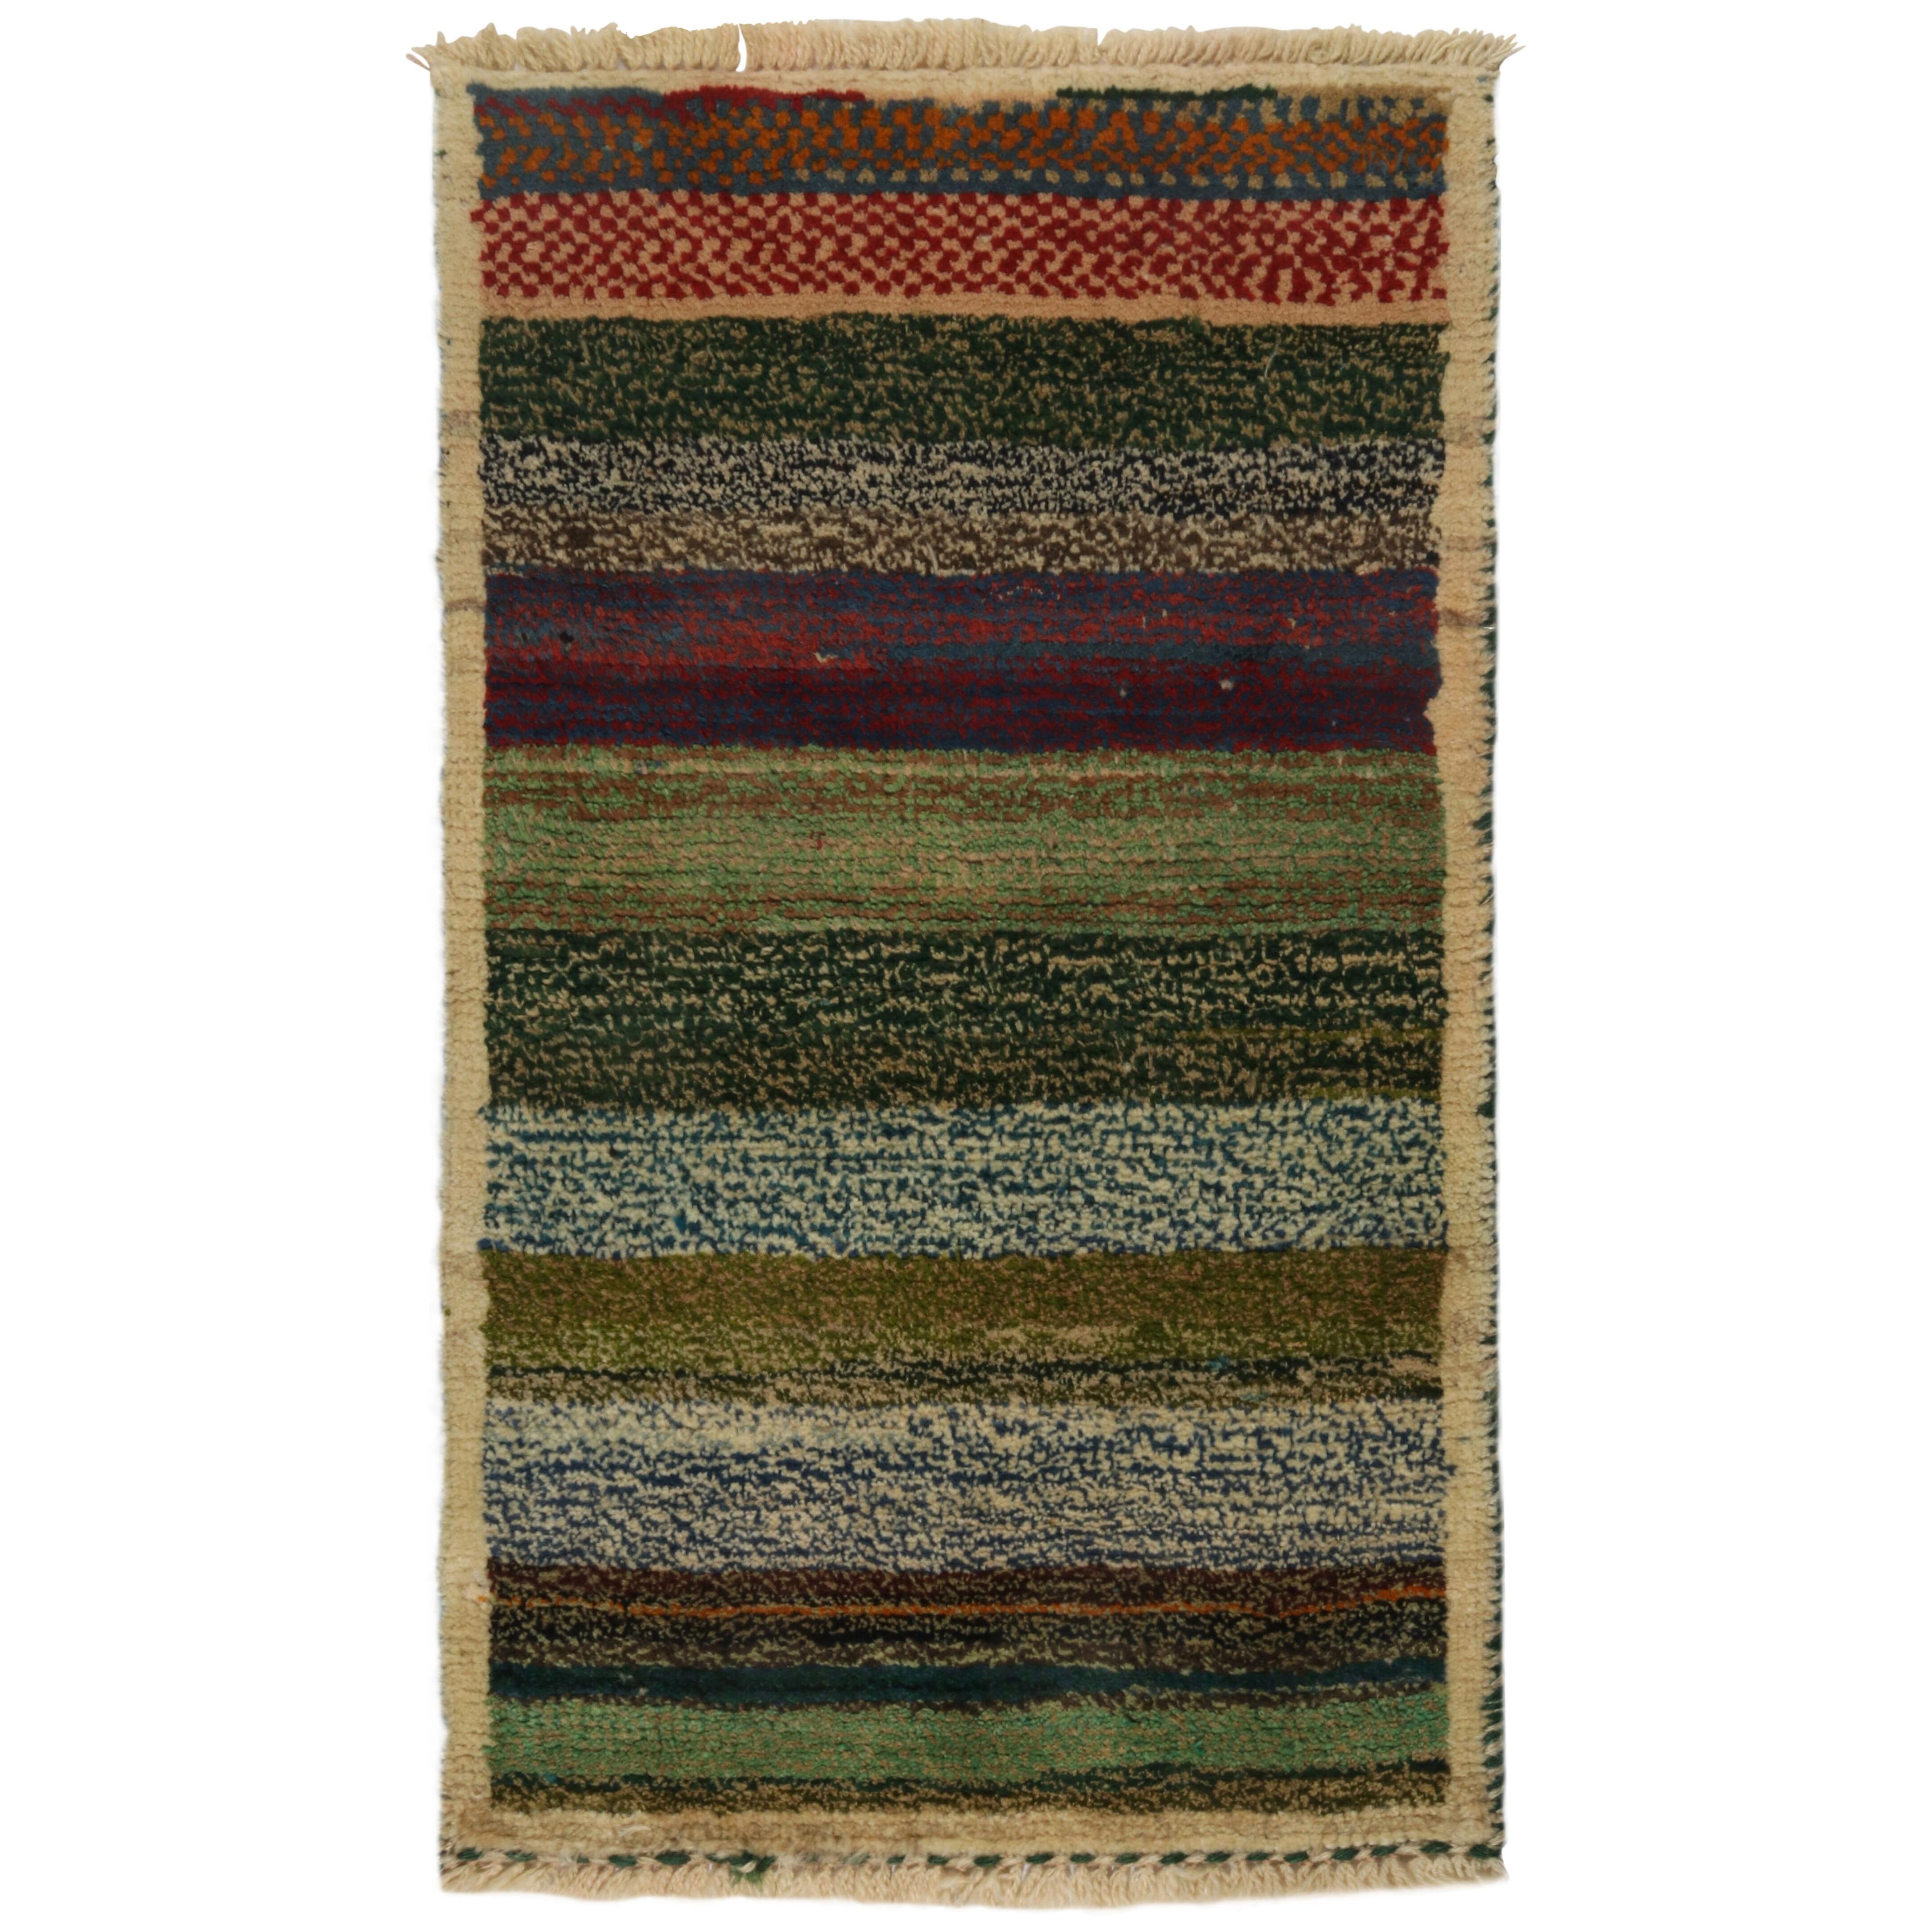  Vintage Gabbeh Tribal rug in Green, Beige-brown and Blue Shaggy Stripes